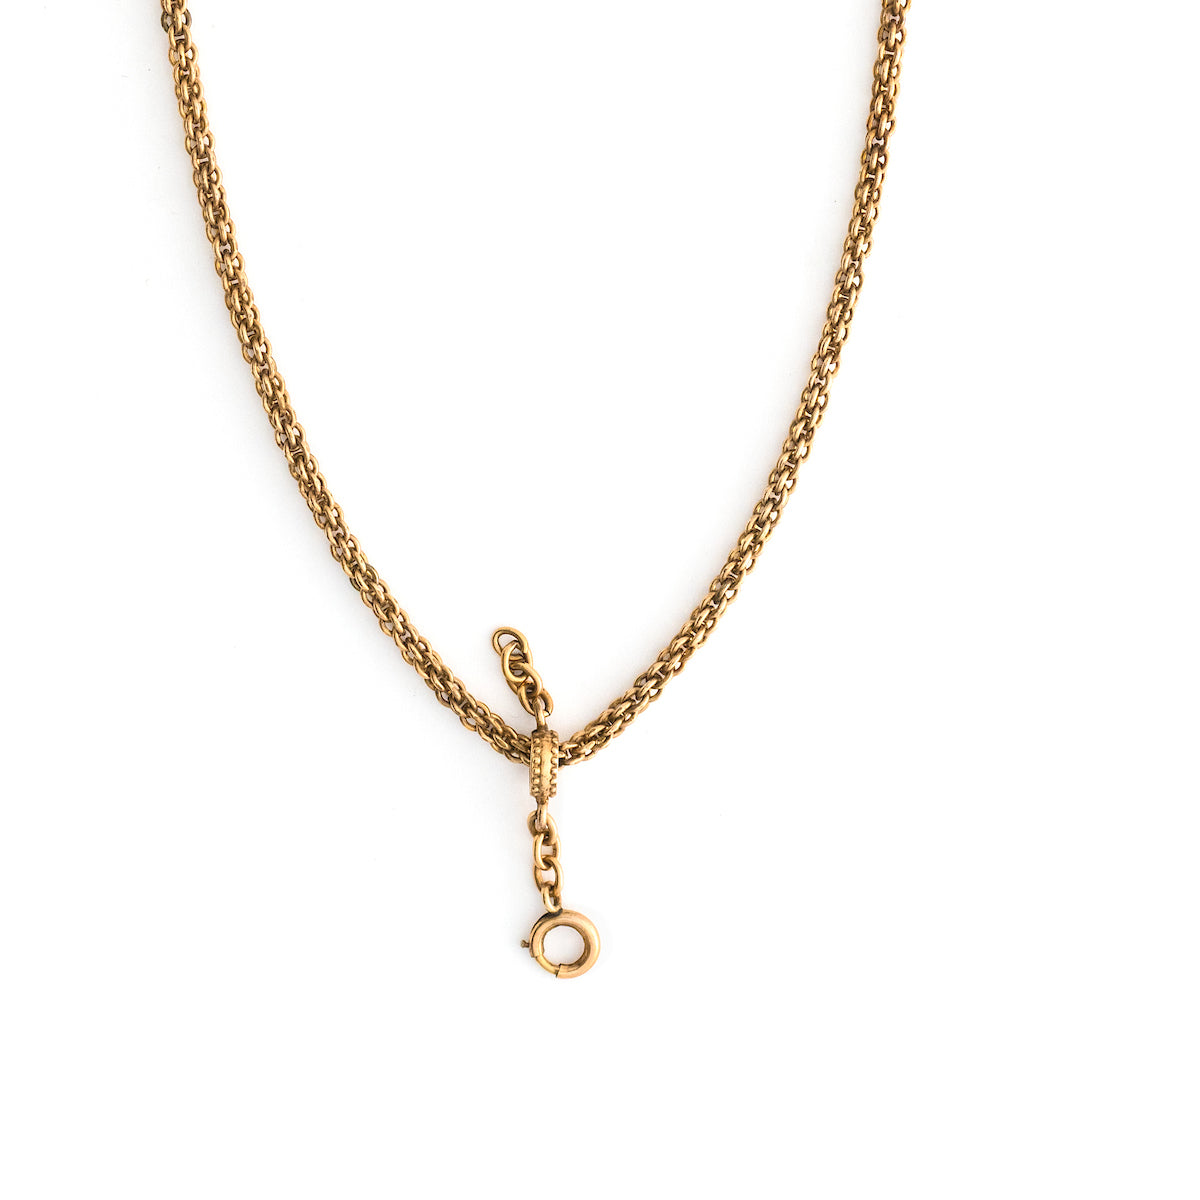 Chanel Vintage Gold Long Mirror Chain Necklace – Wopsters Closet